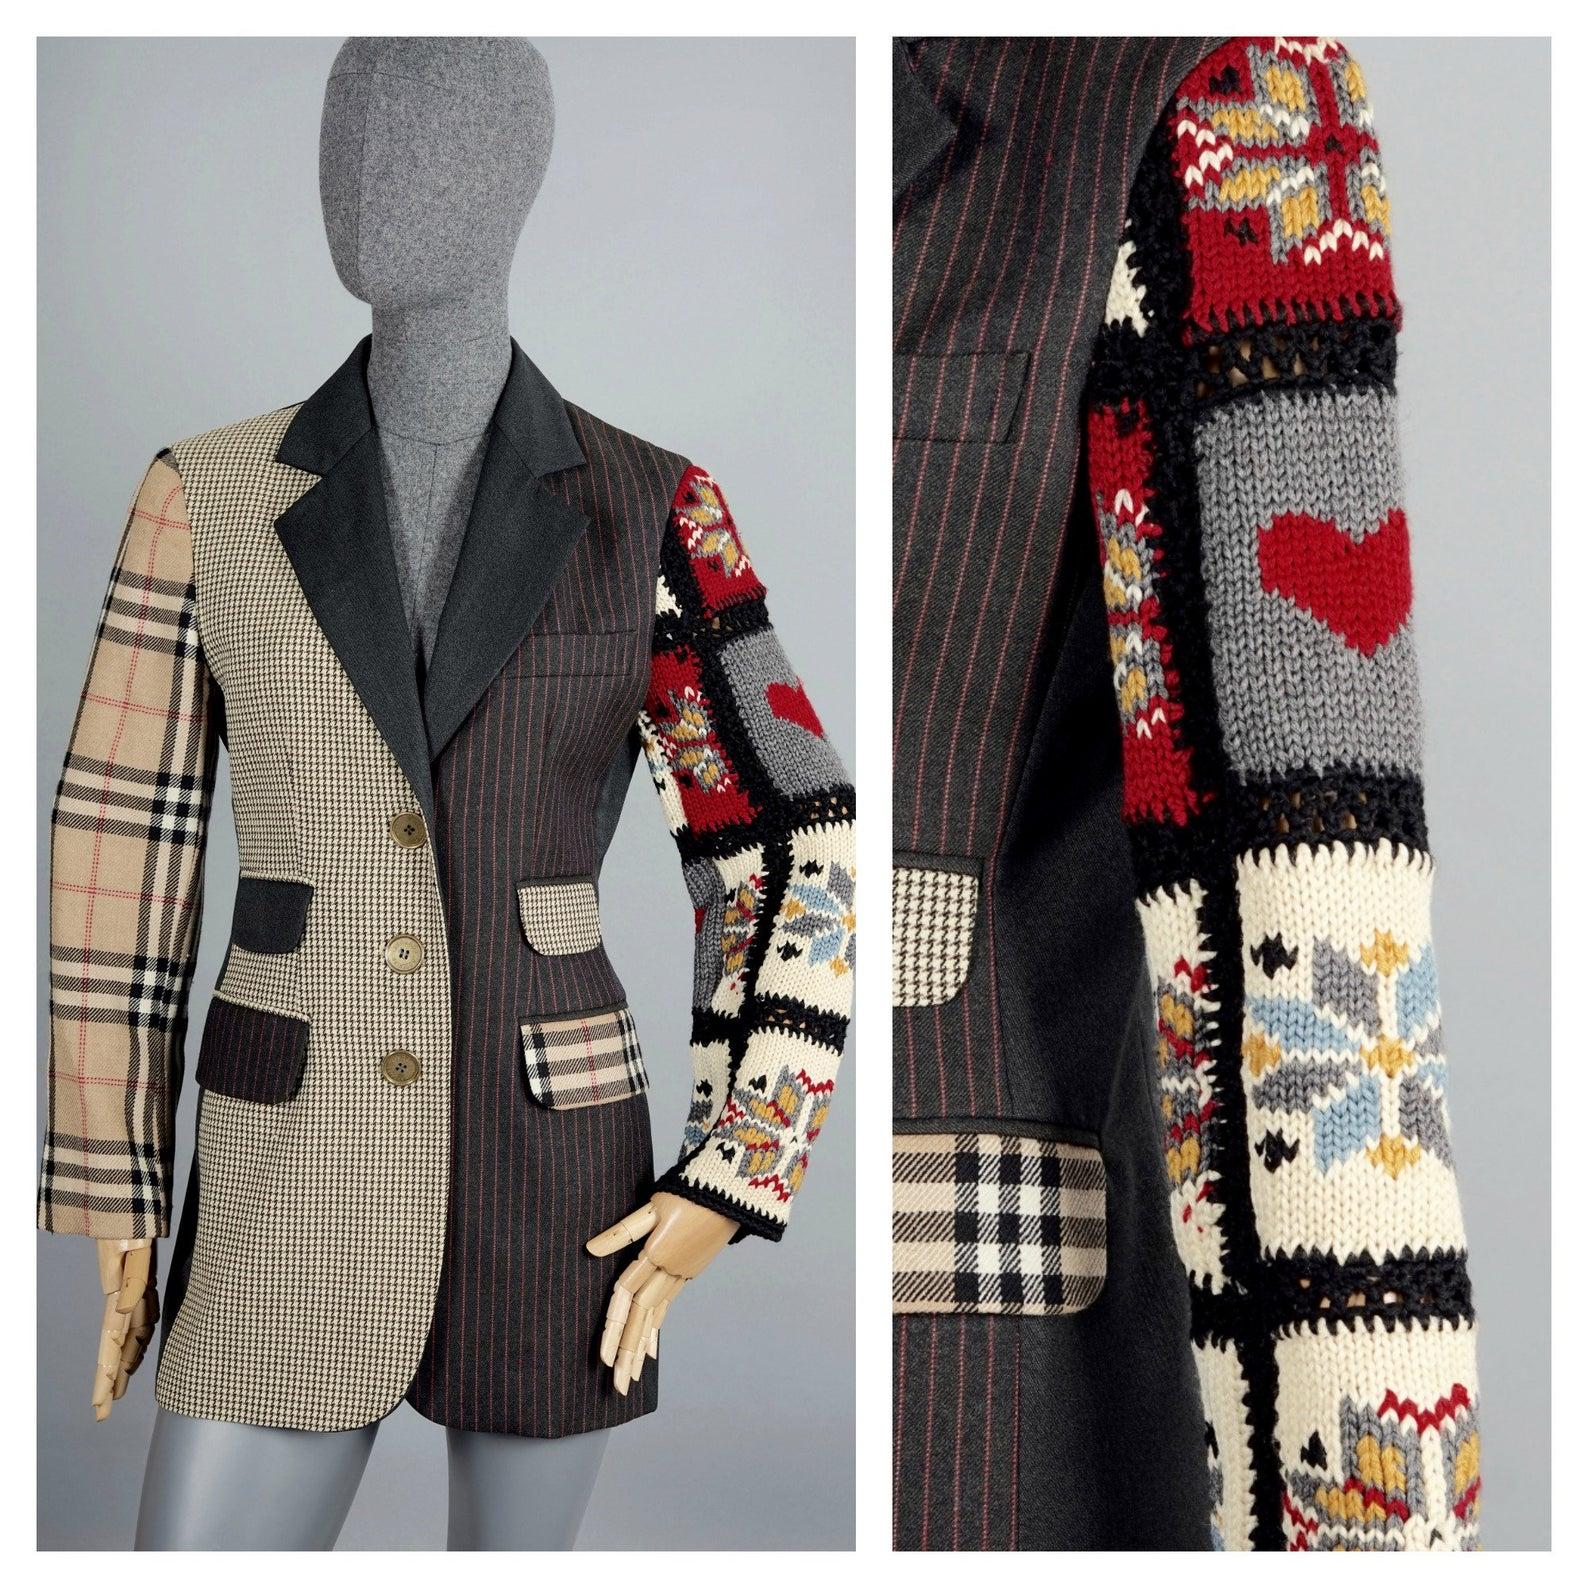 Vintage MOSCHINO COUTURE Patchwork Novelty Blazer Jacket

Measurements taken laid flat, please double bust and waist:
Shoulder: 15.35 inches (39 cm)
Sleeves: 23.03 inches (58.5 cm)
Bust: 17.32 inches (44 cm)
Waist: 14.17 inches (36 cm)
Length: 29.92